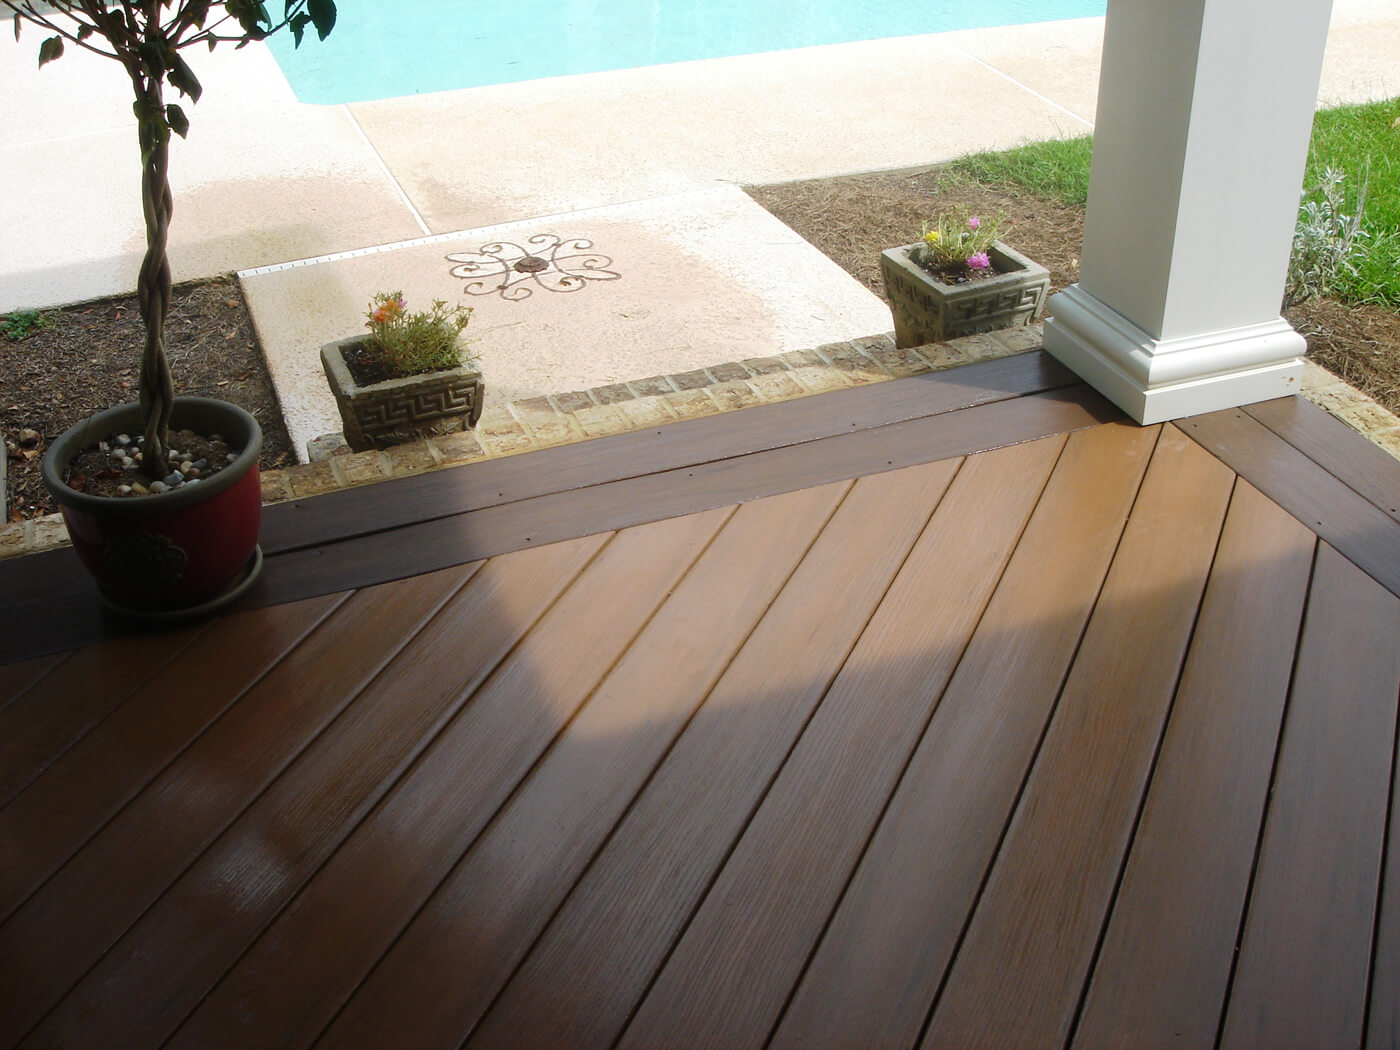 Wood deck detail and plant decors